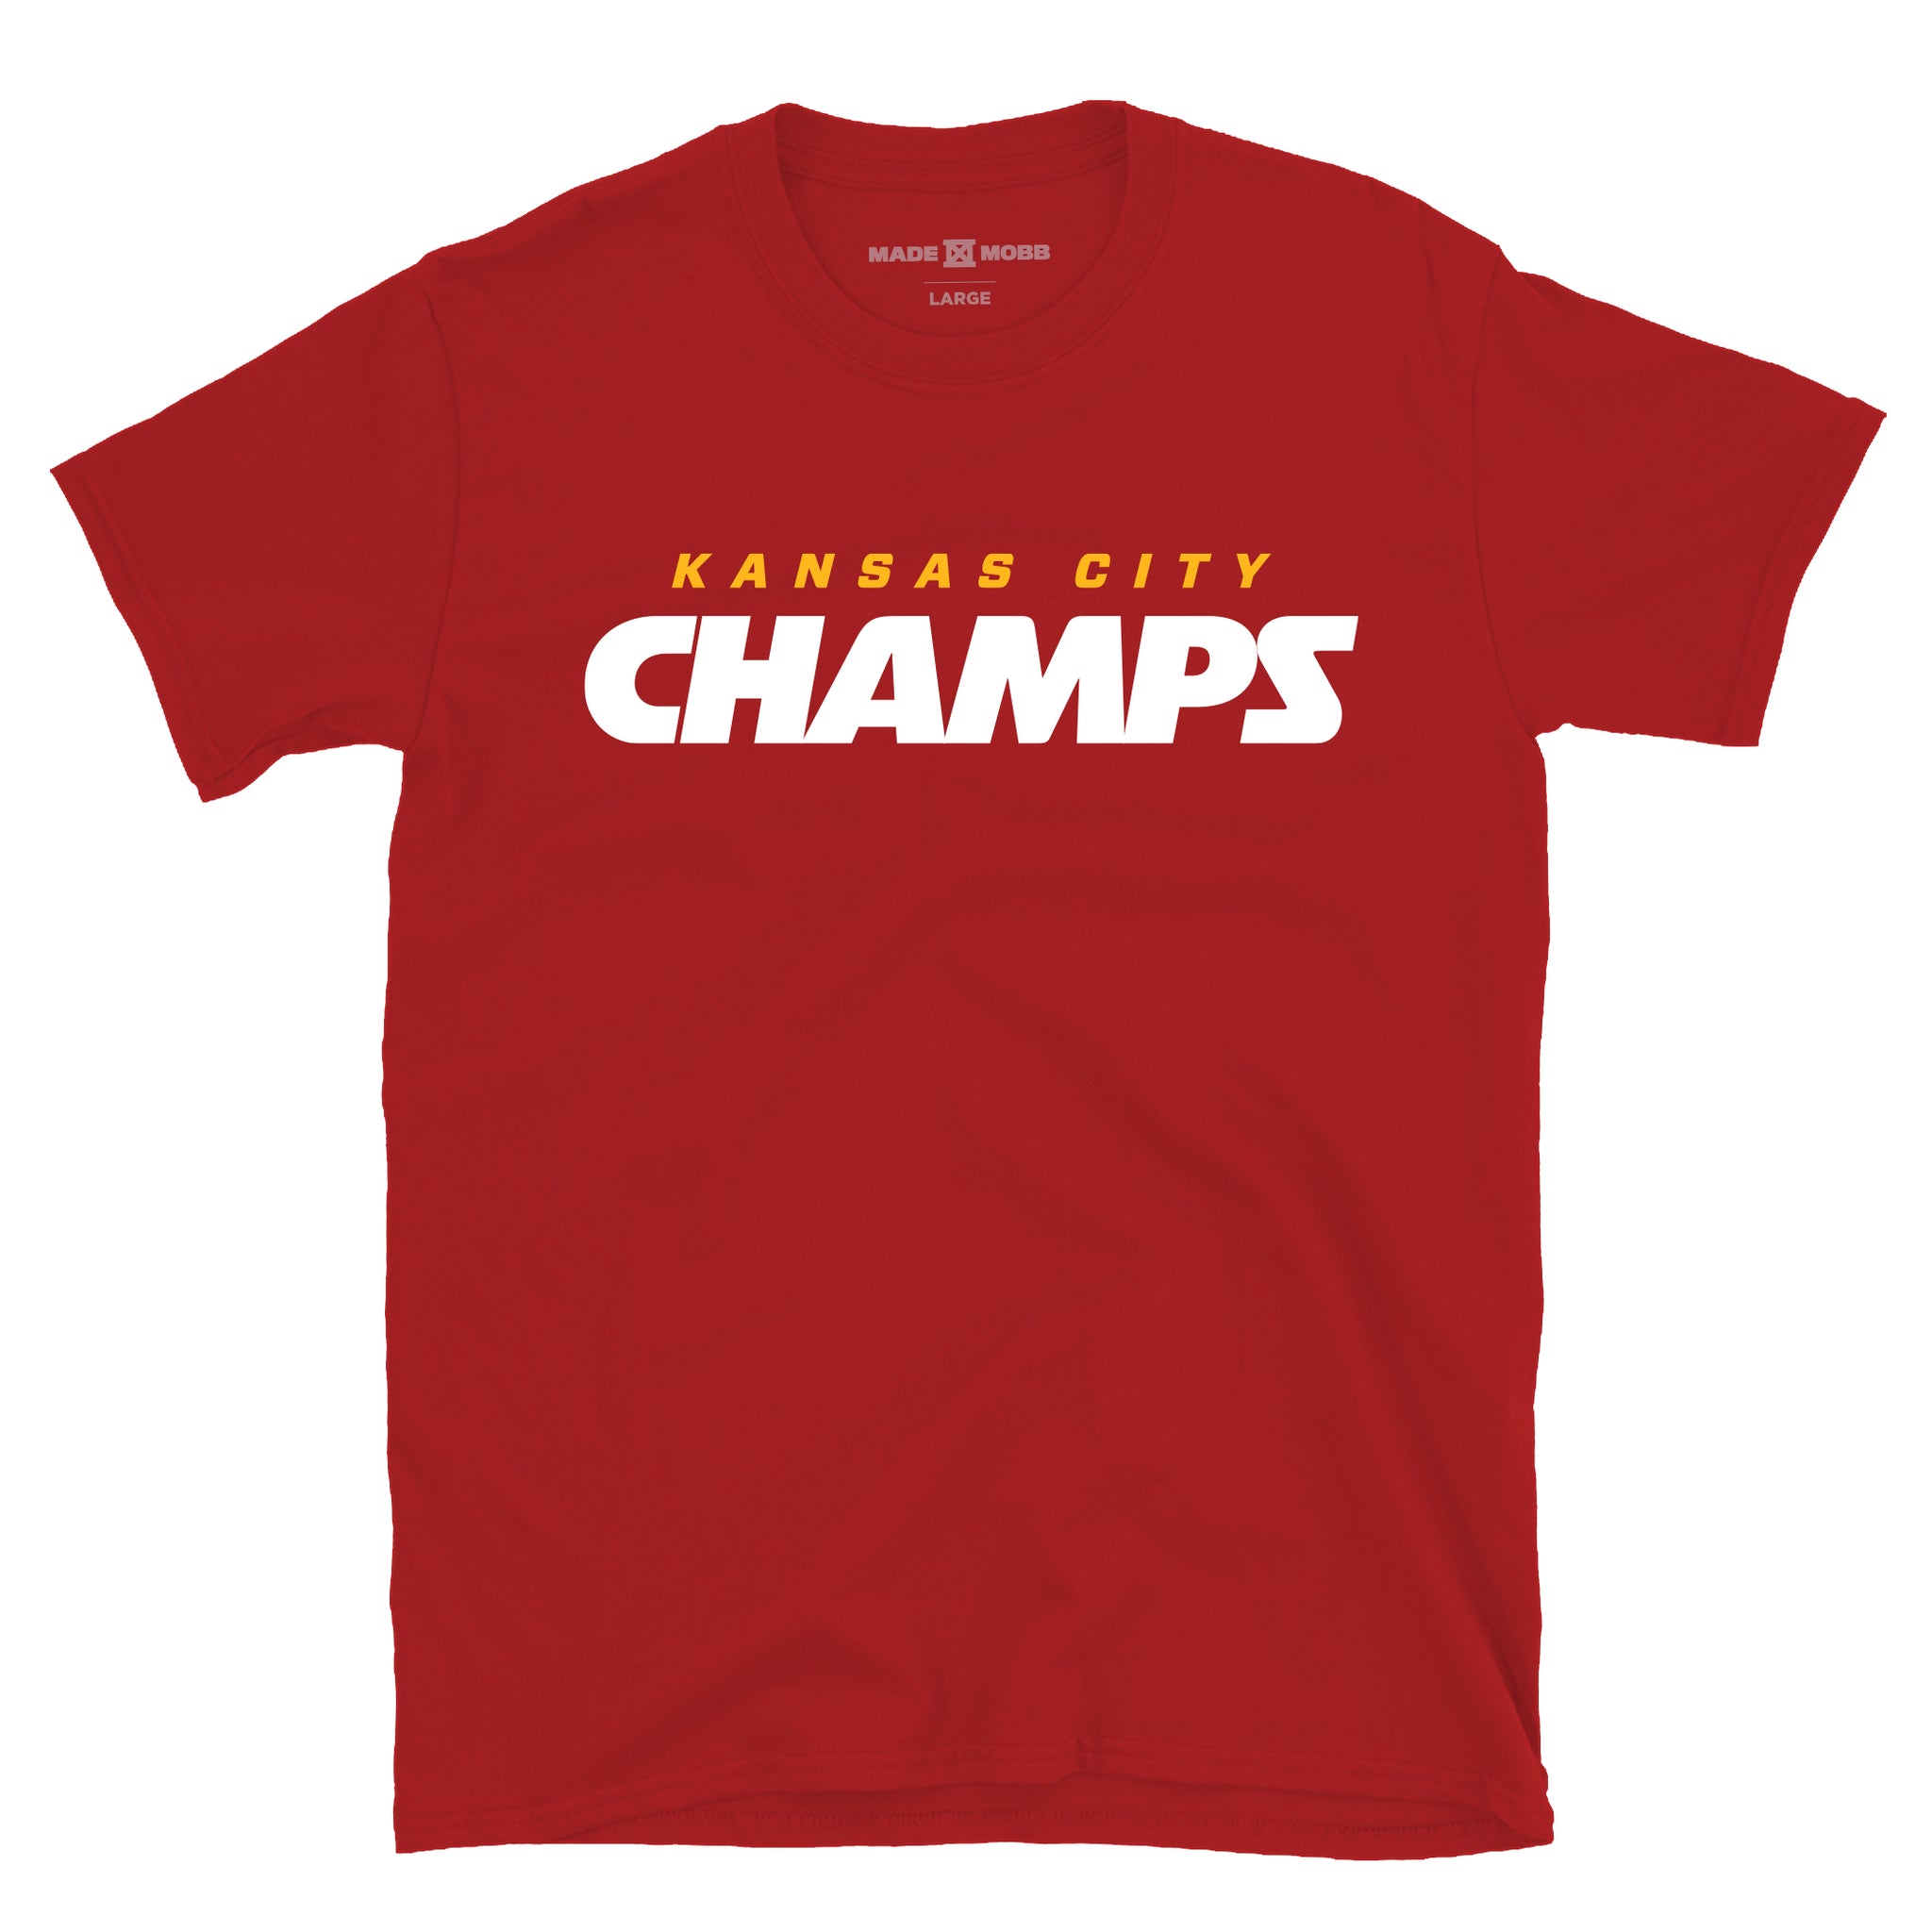 LVII KC CHAMPS Tee - Red